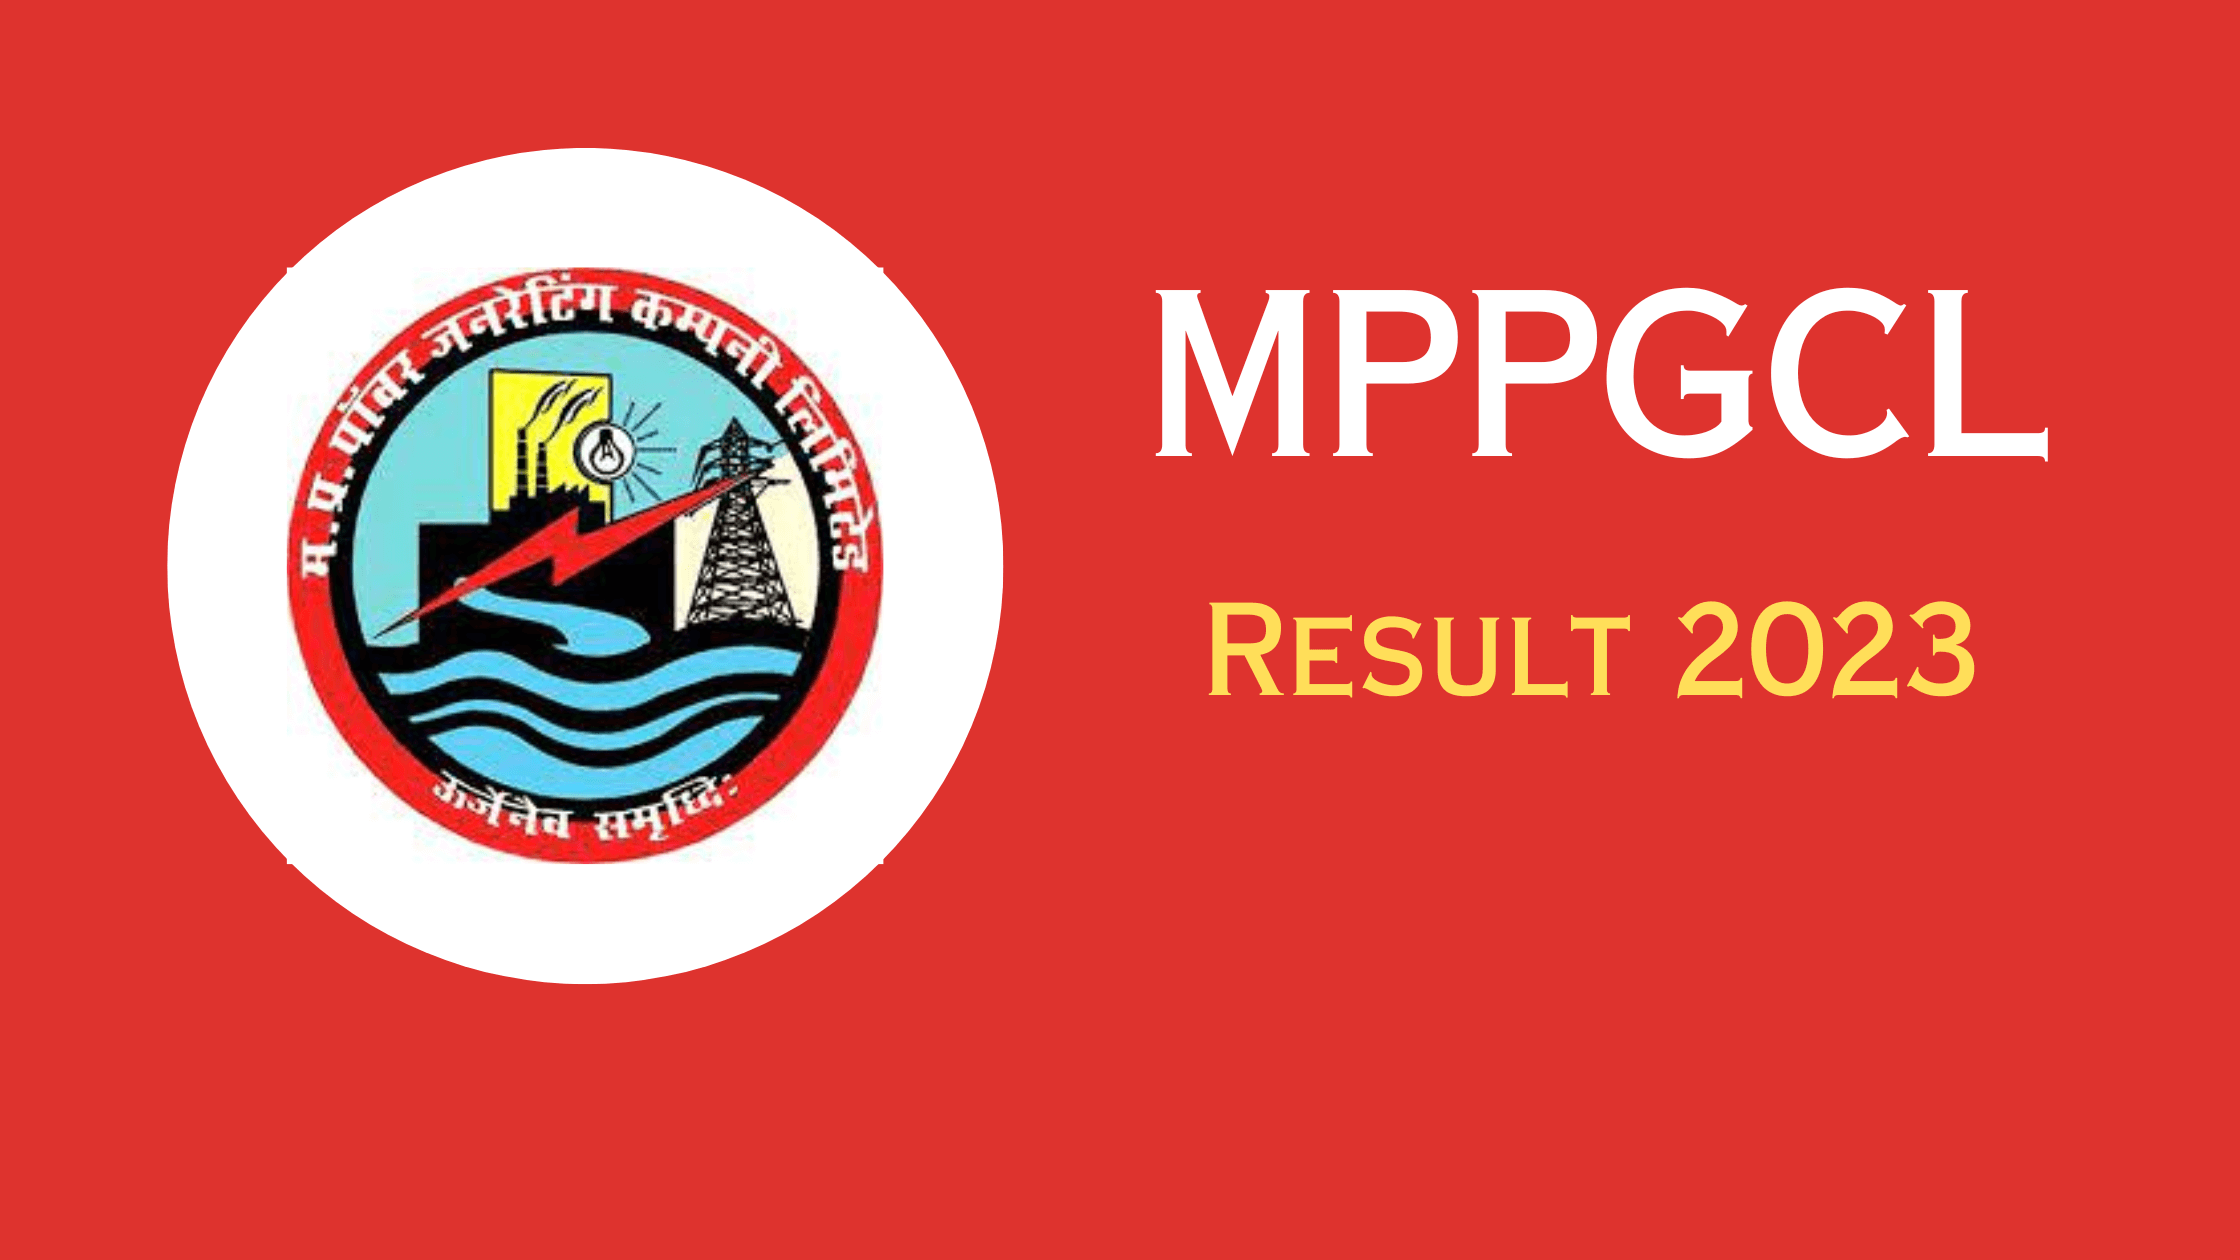 MPPGCL Result 2023